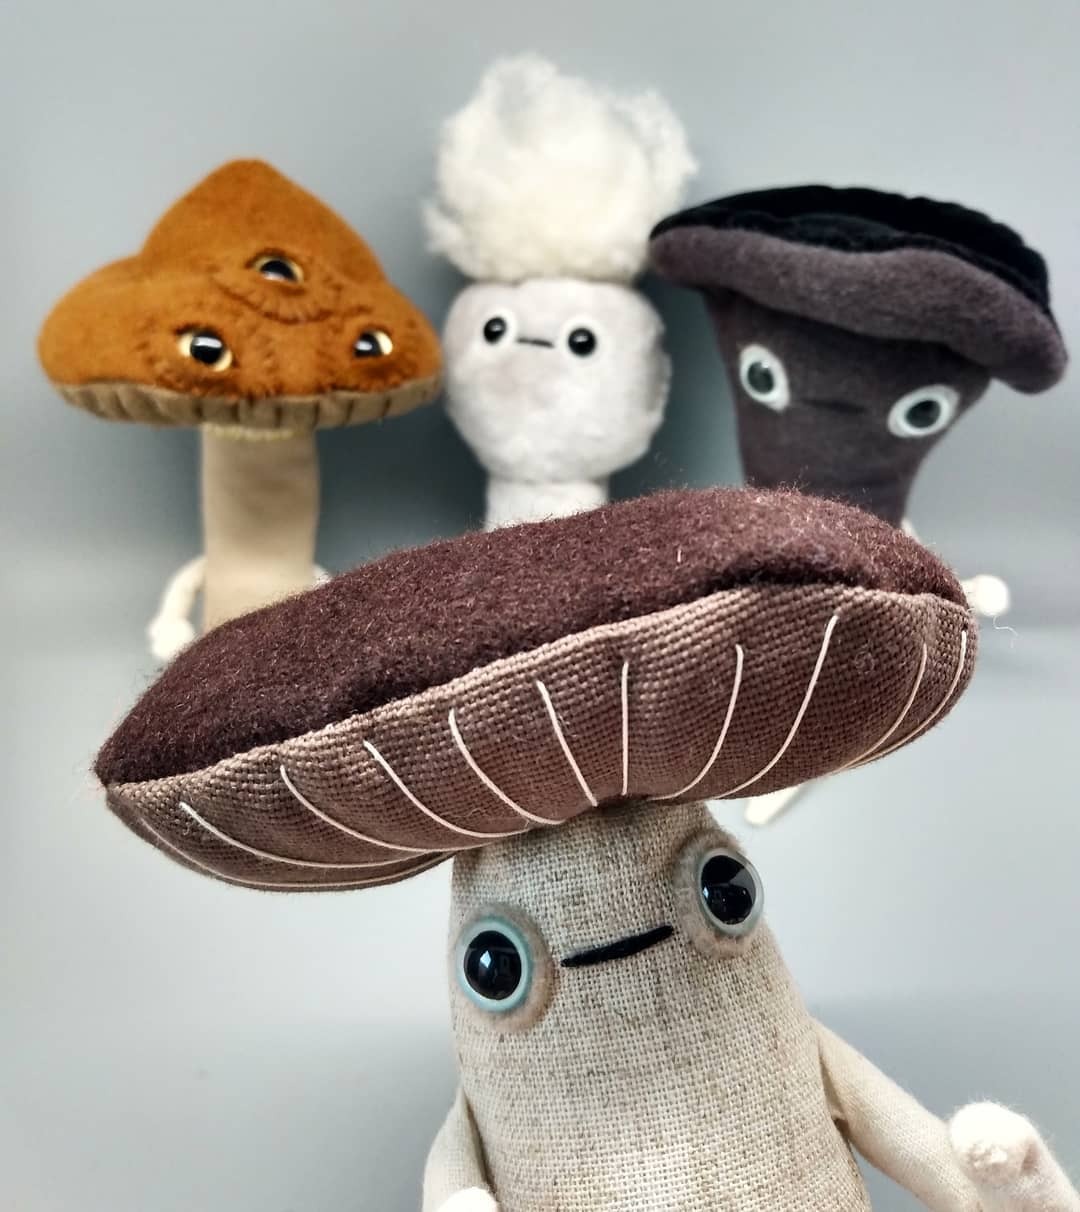 Fungus And Vegetable Textile Sculptures By Kami Goertz 4